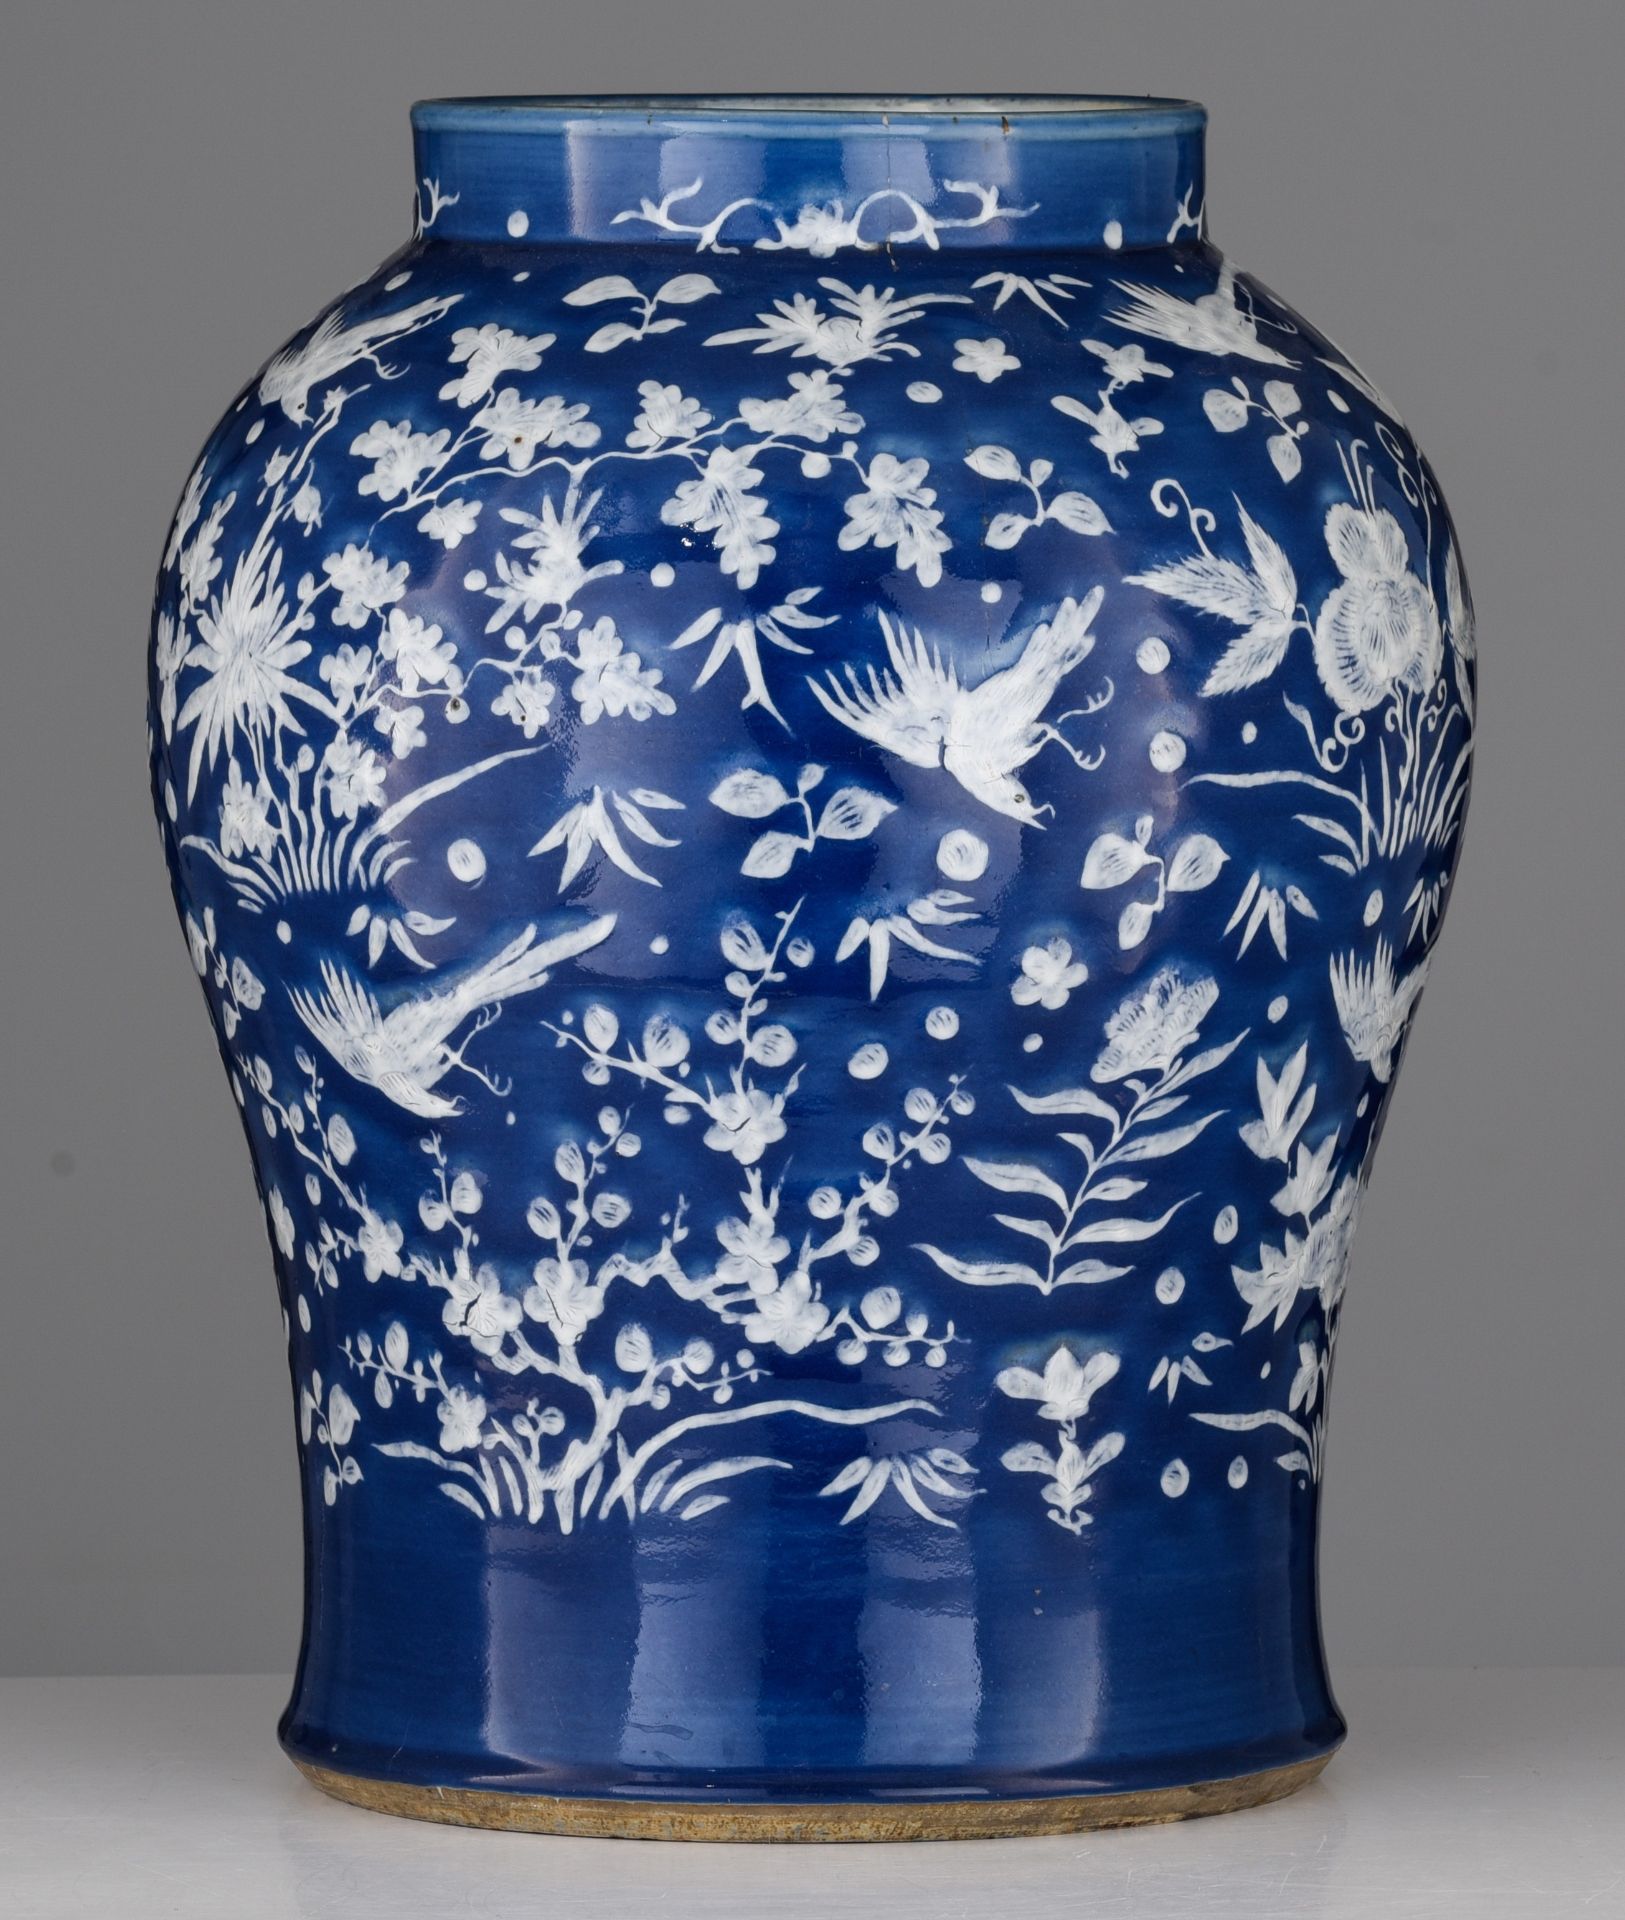 Two Chinese blue and white 'Scrolling lotus' baluster vases and cover, 19thC, H 49 - 51 cm - Image 10 of 15